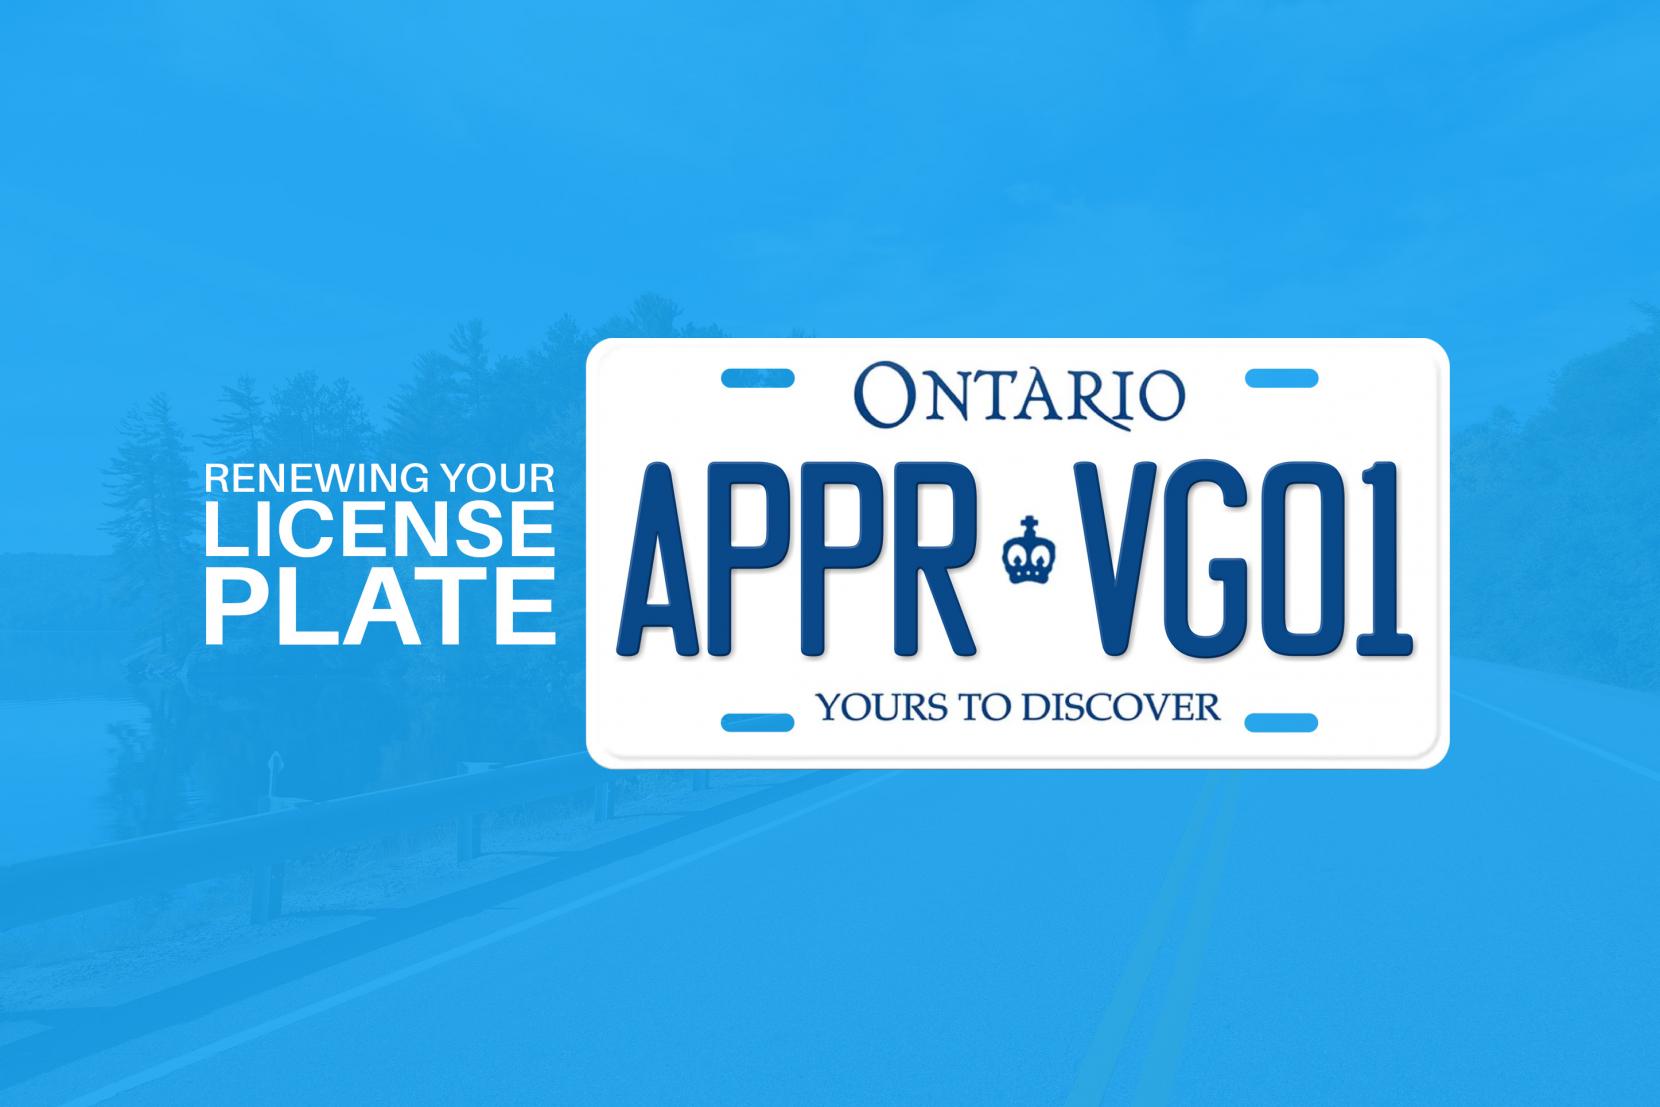 How To Renew Your Ontario License Plate - Your Complete Guide